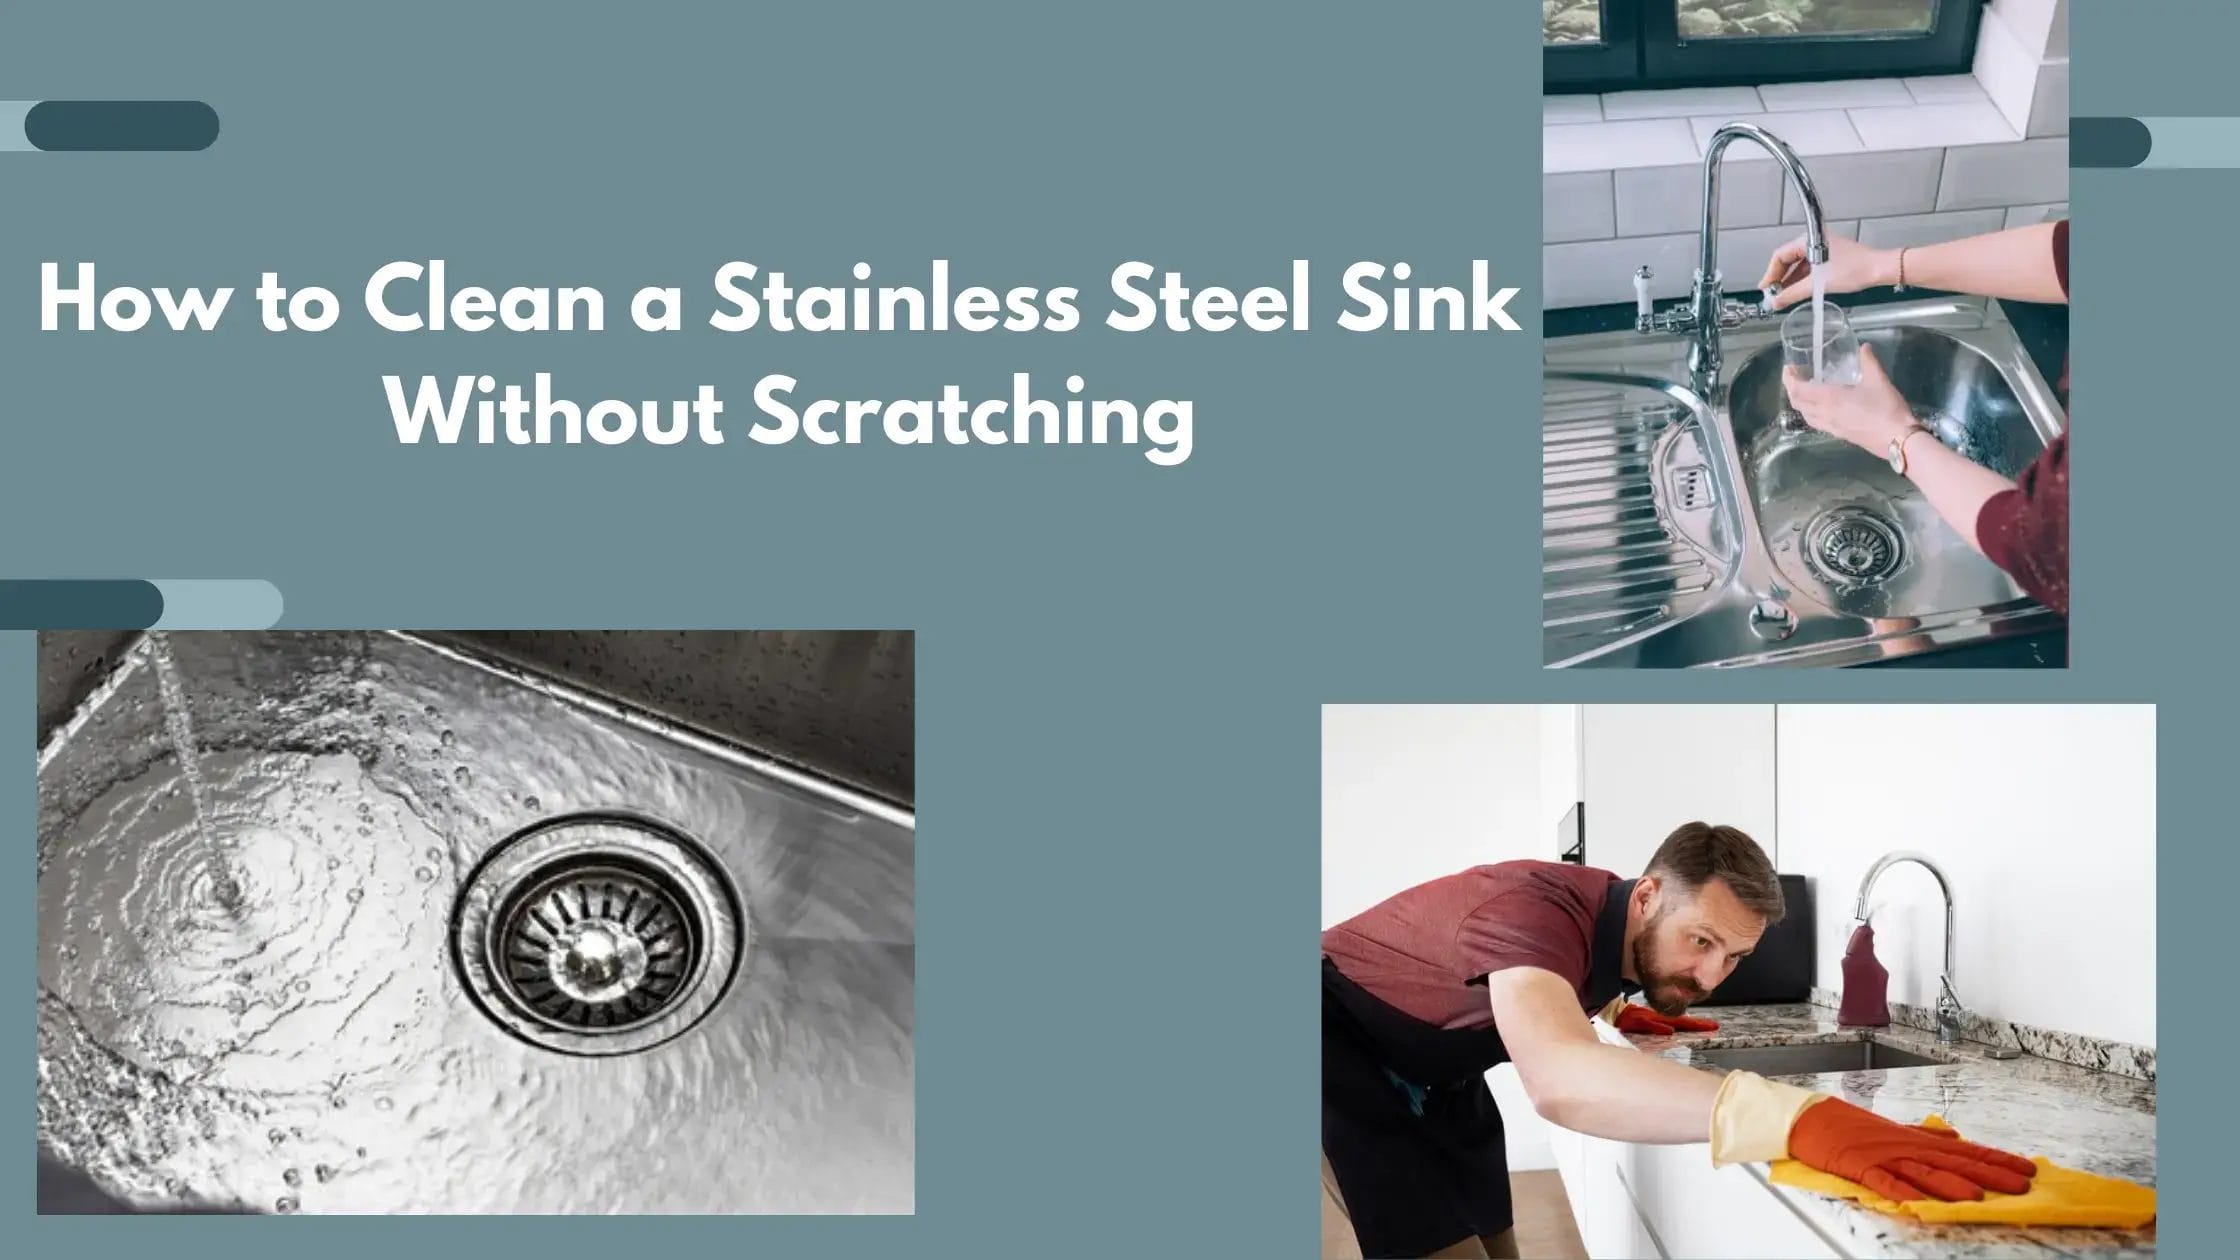 How to Clean a Stainless Steel Sink Without Scratching